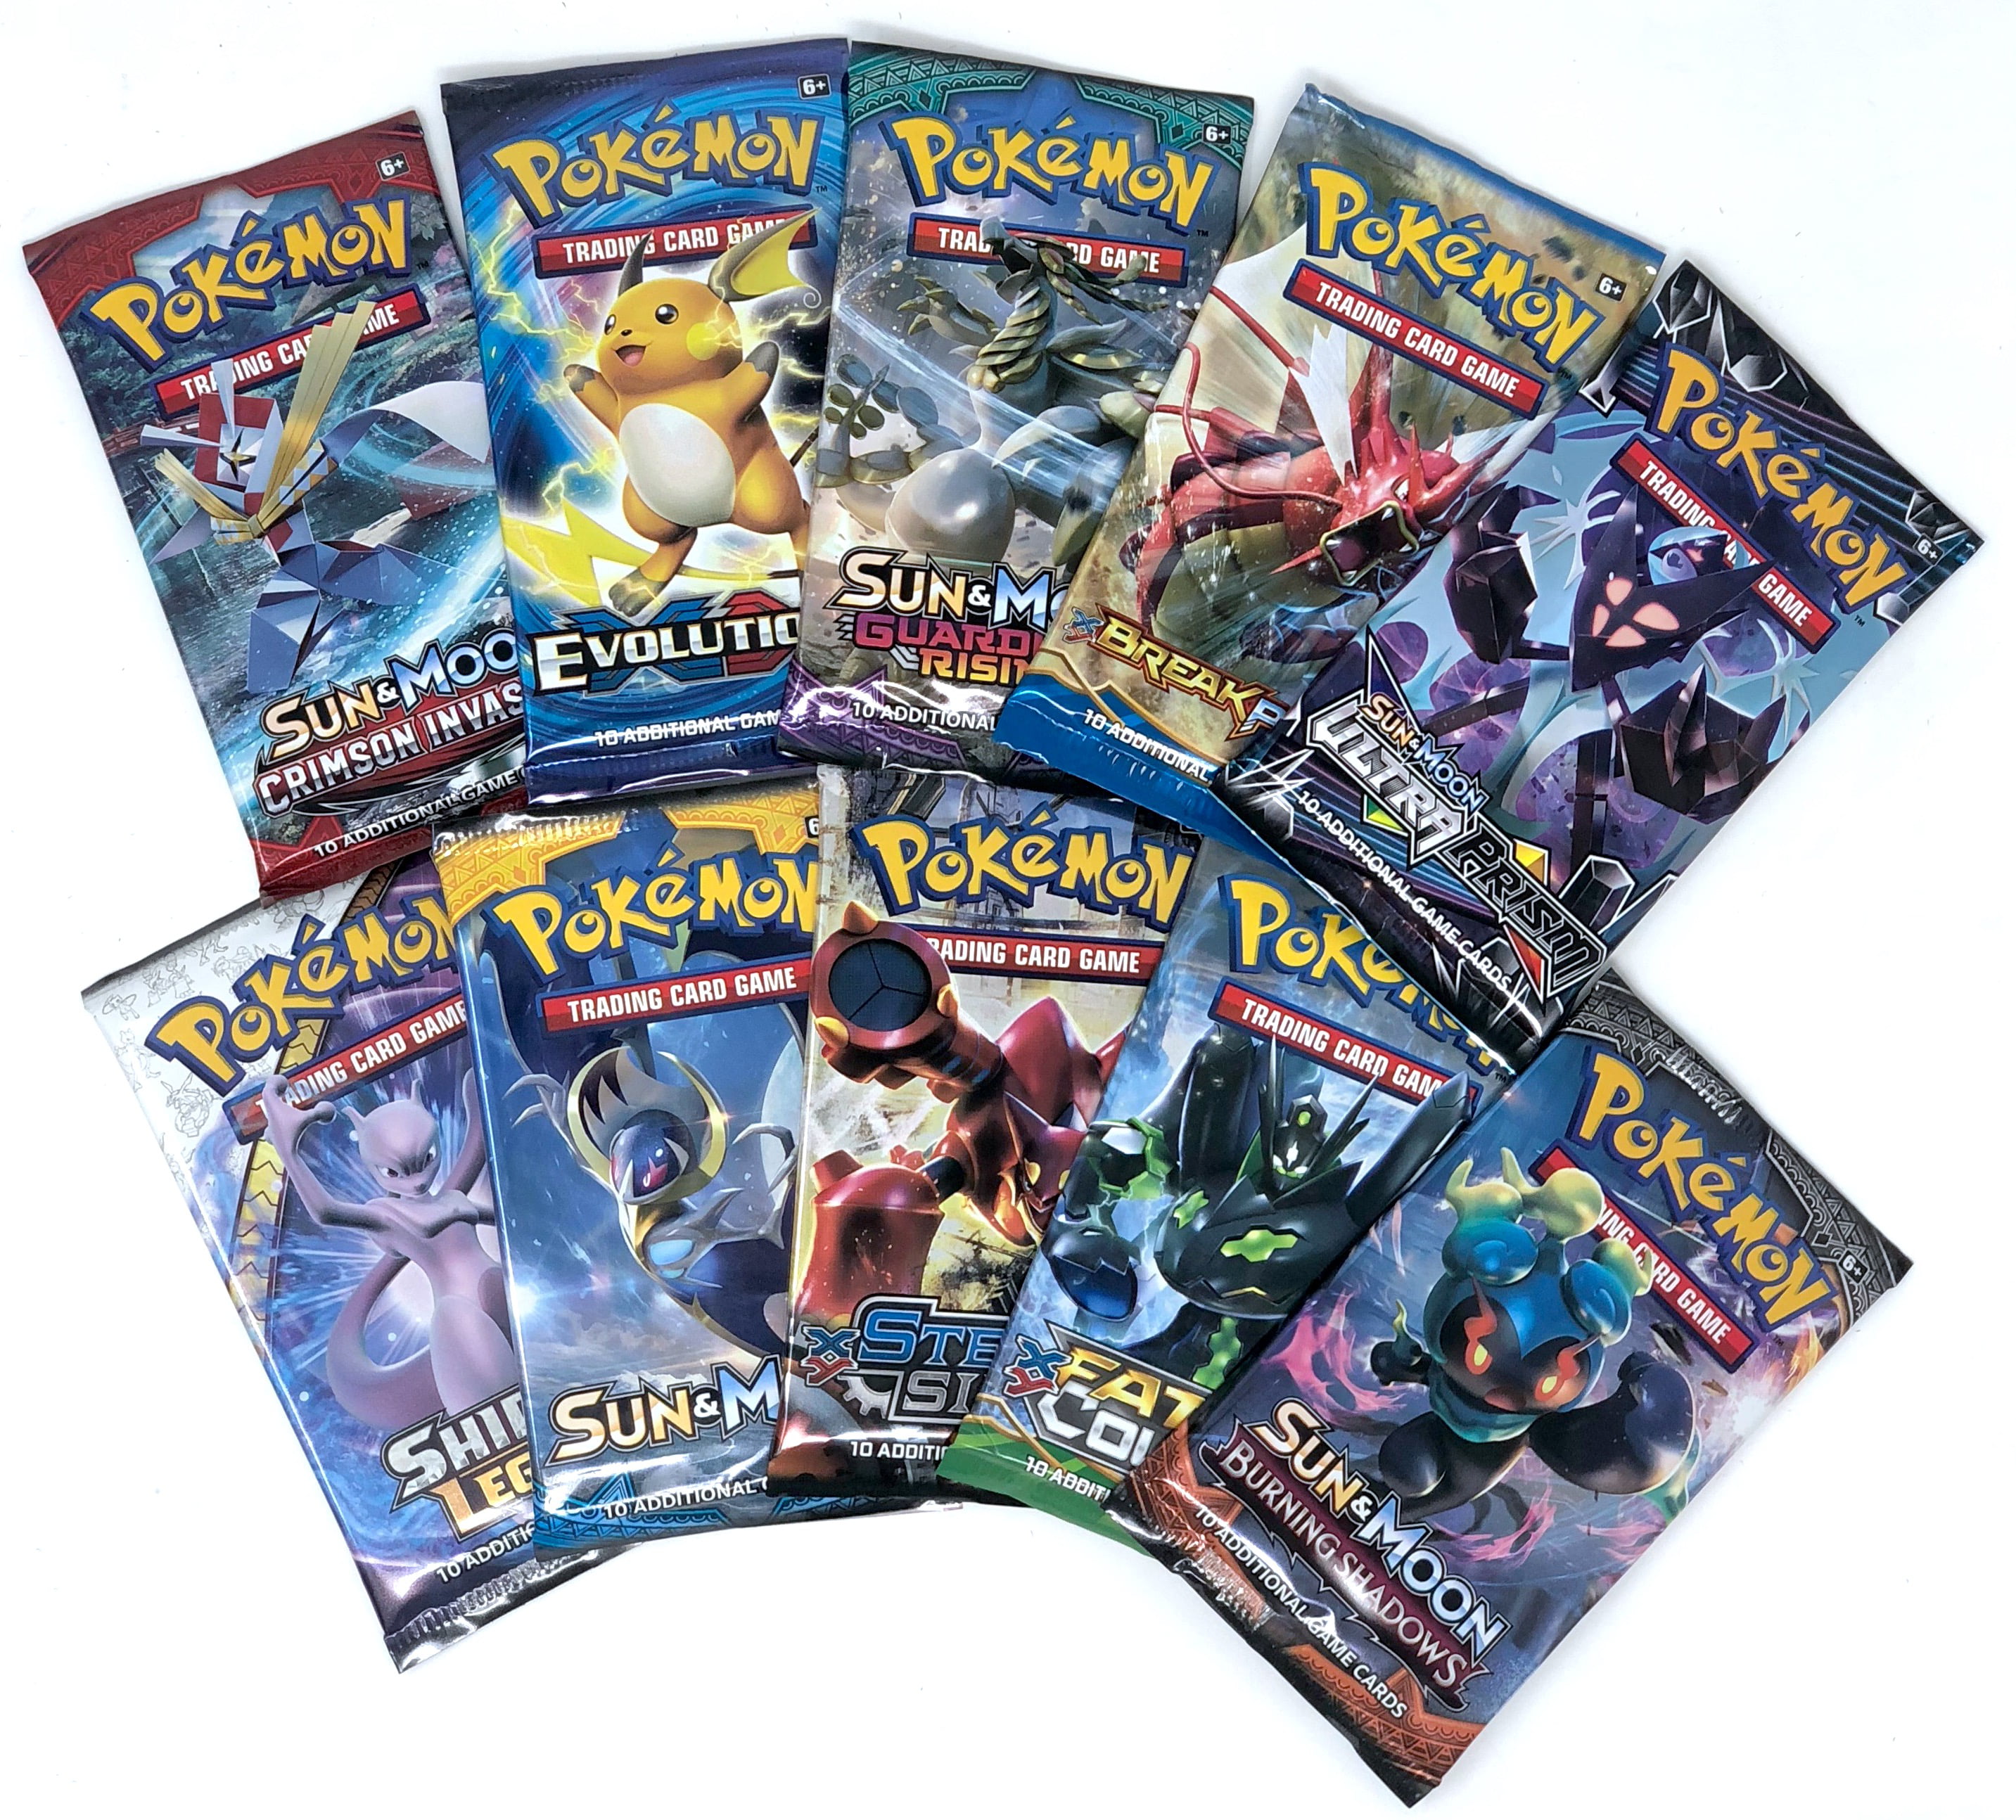 25 PACKS 3 Card & 10 Card Packs Assorted Authentic Pokemon Booster Packs 